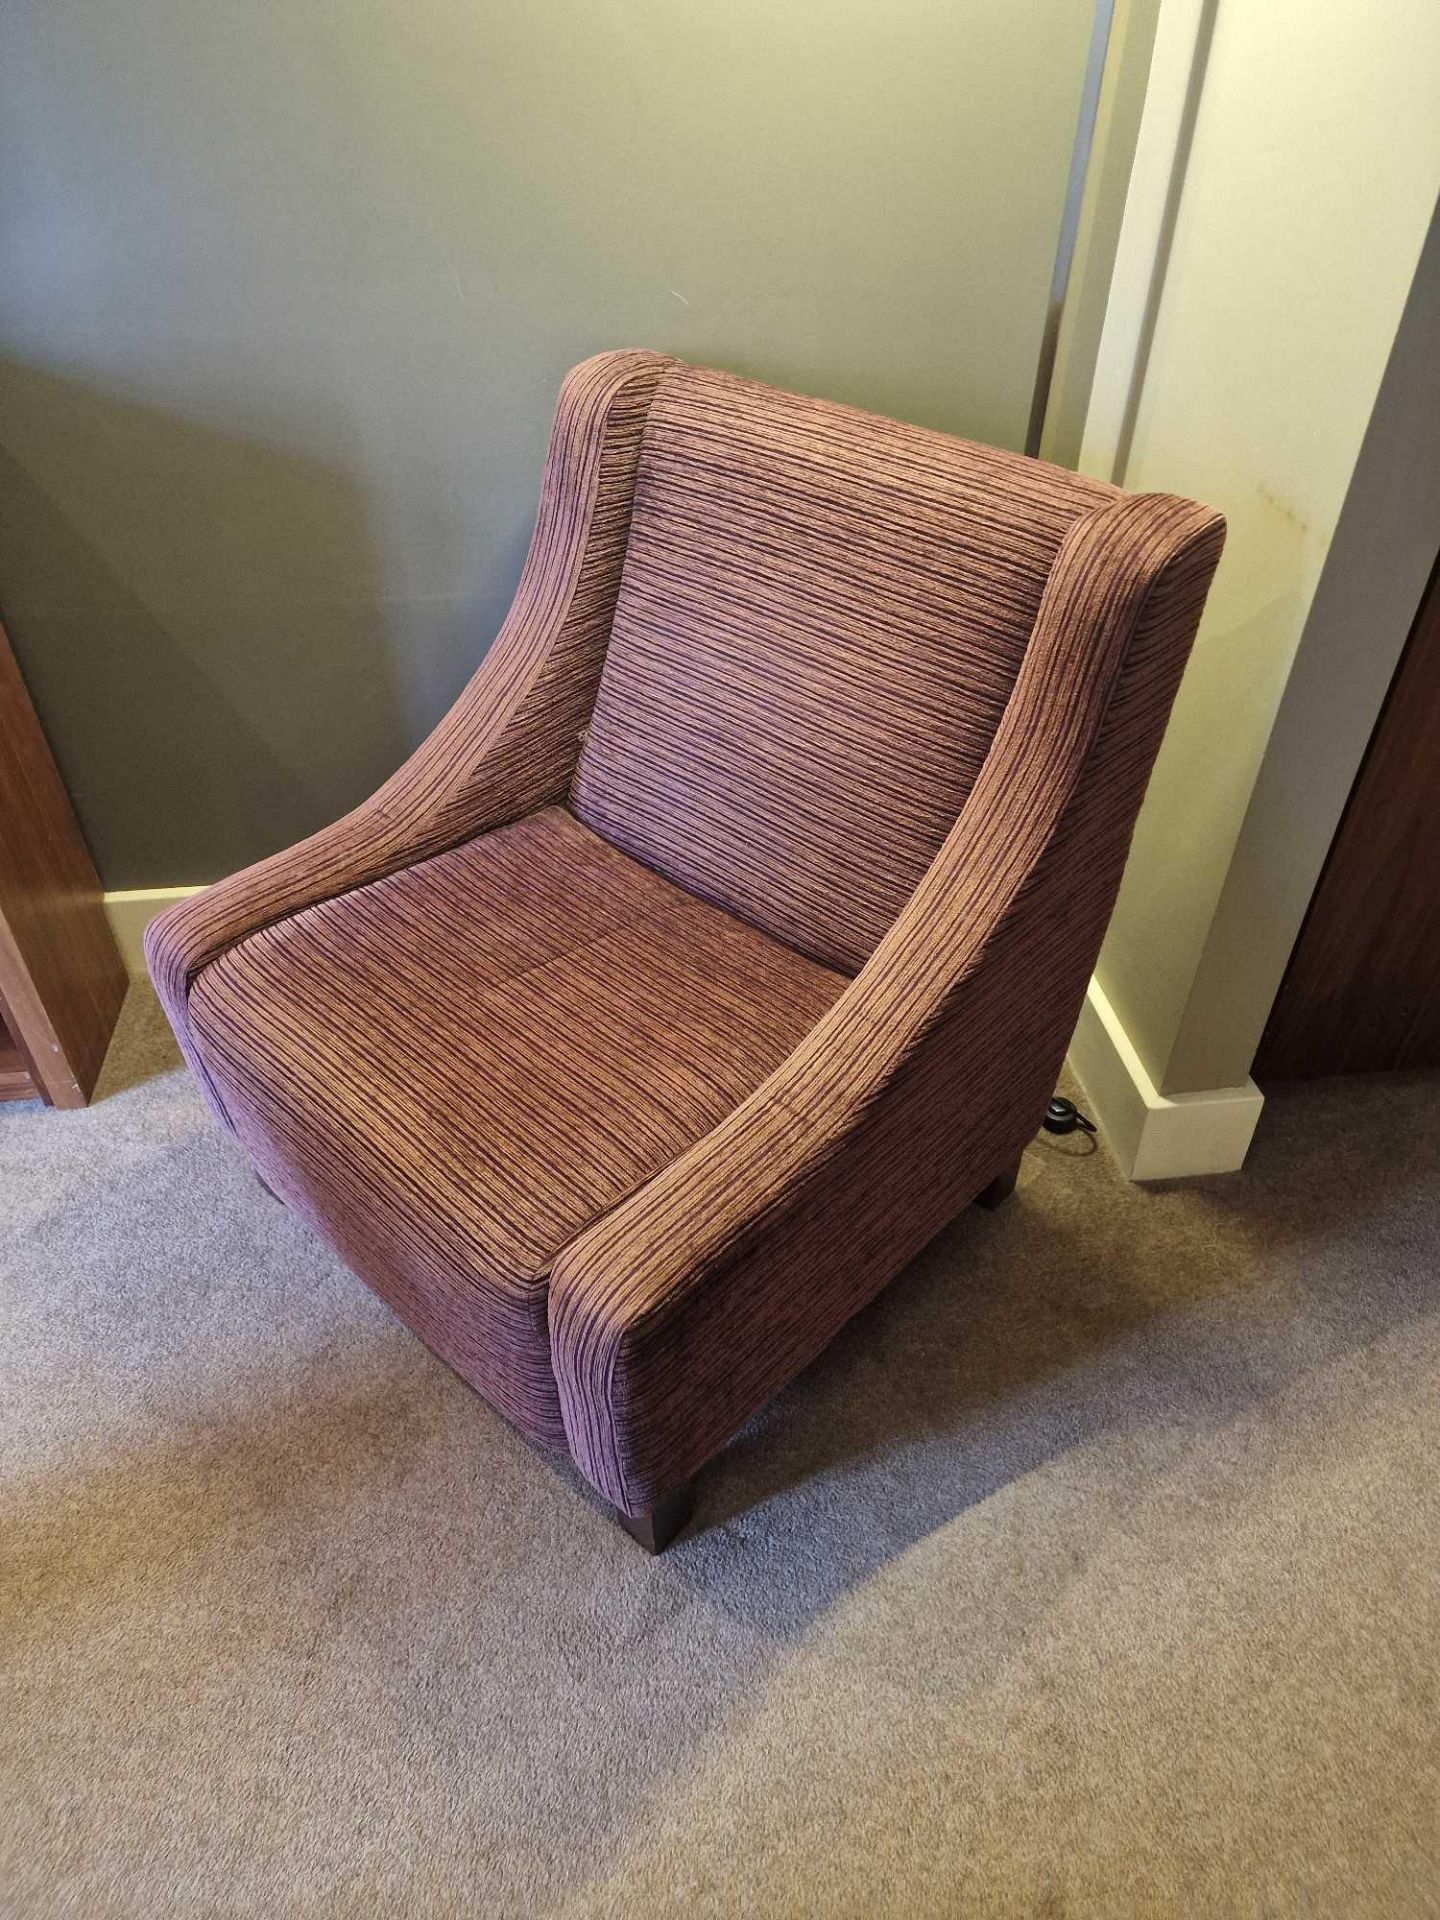 An upholstered relaxer chair 78 x 54 x 86cm ( Location : 120)